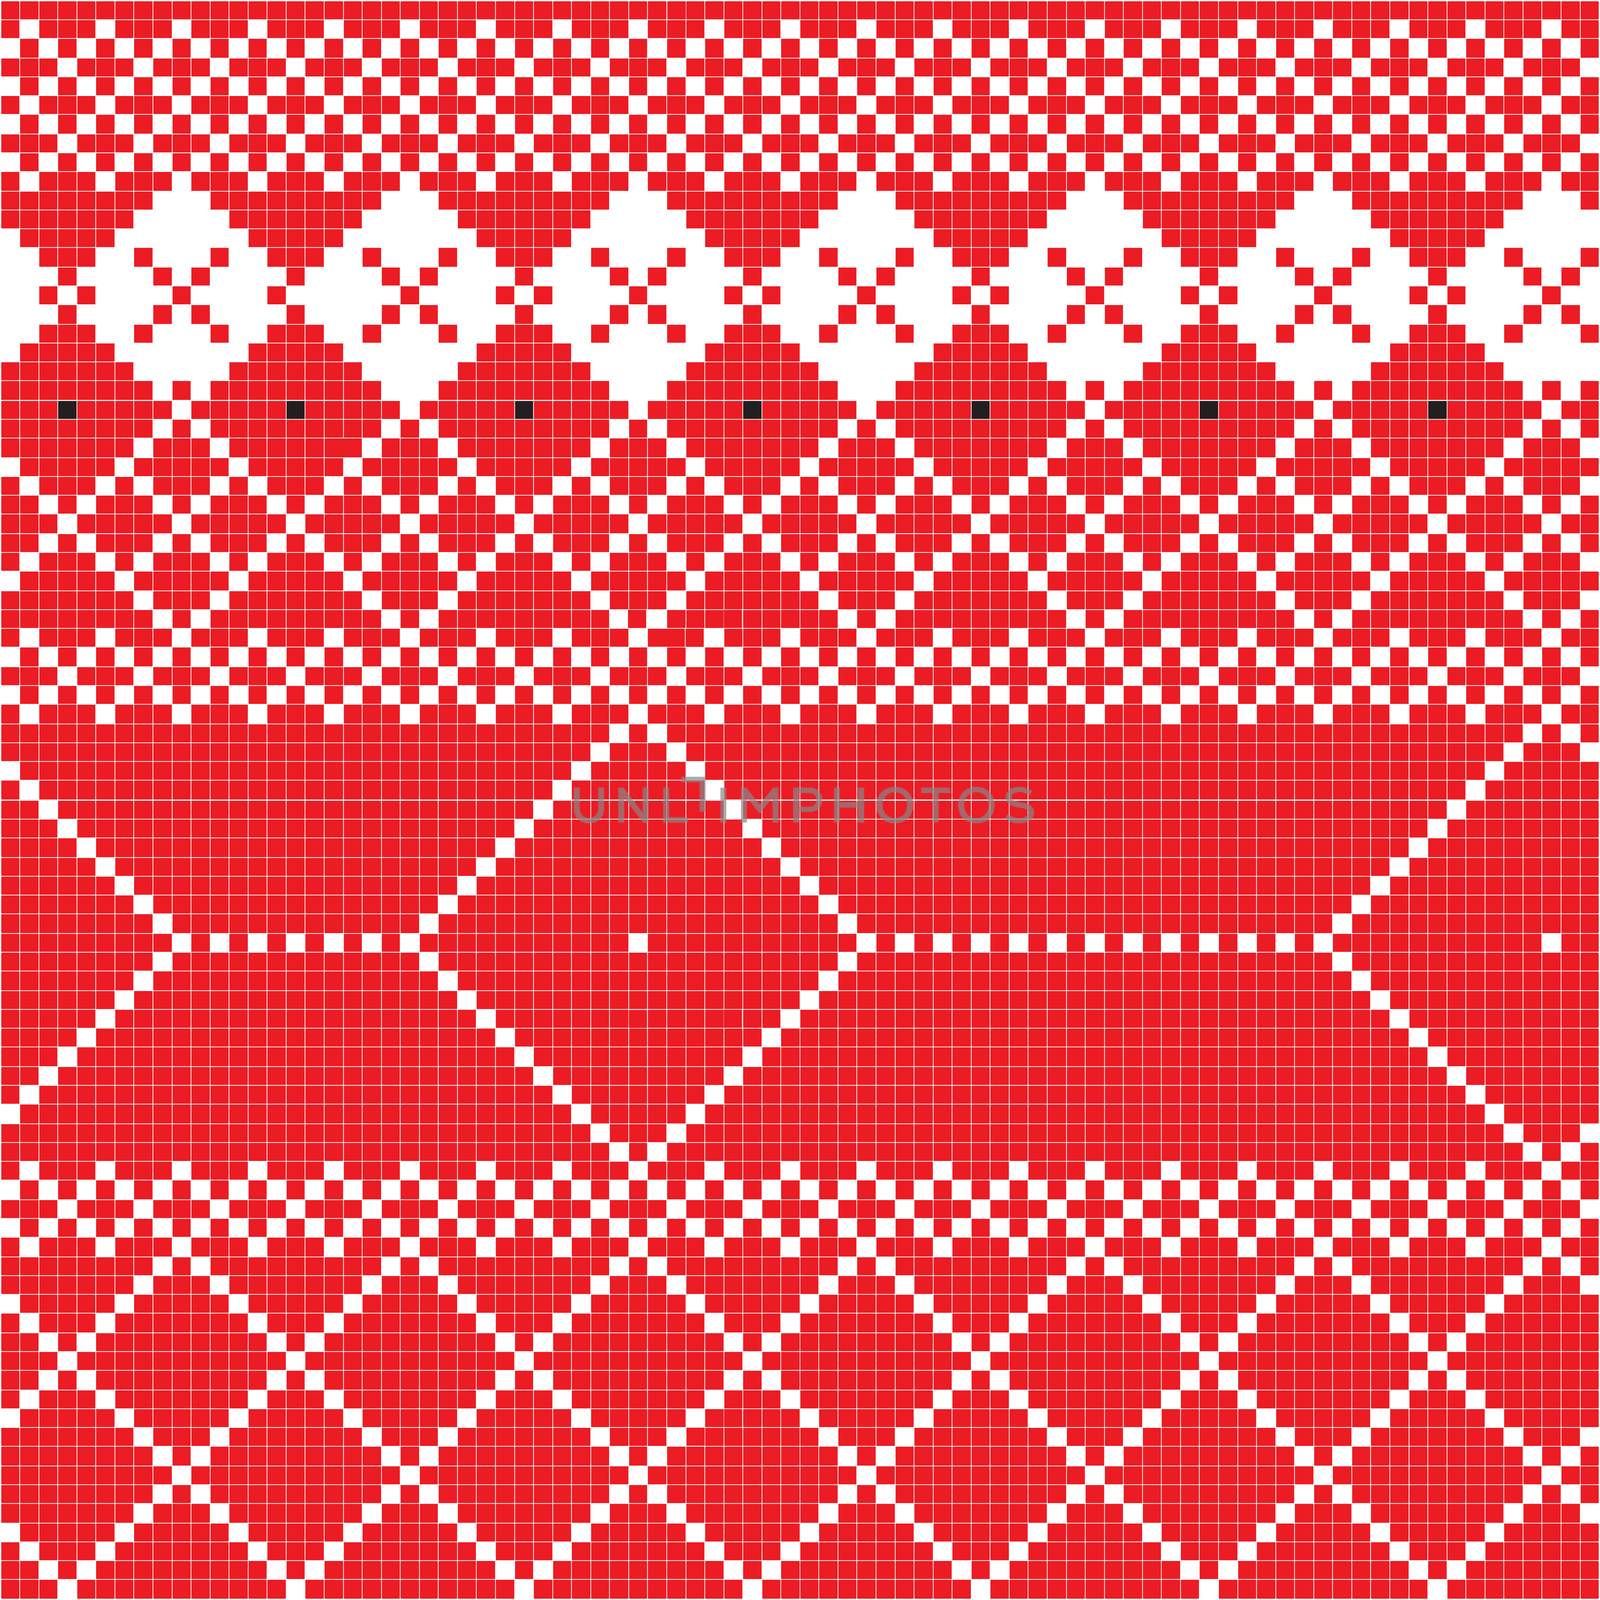 Freestyle pixel pattern inspired by Balkan traditional motifs